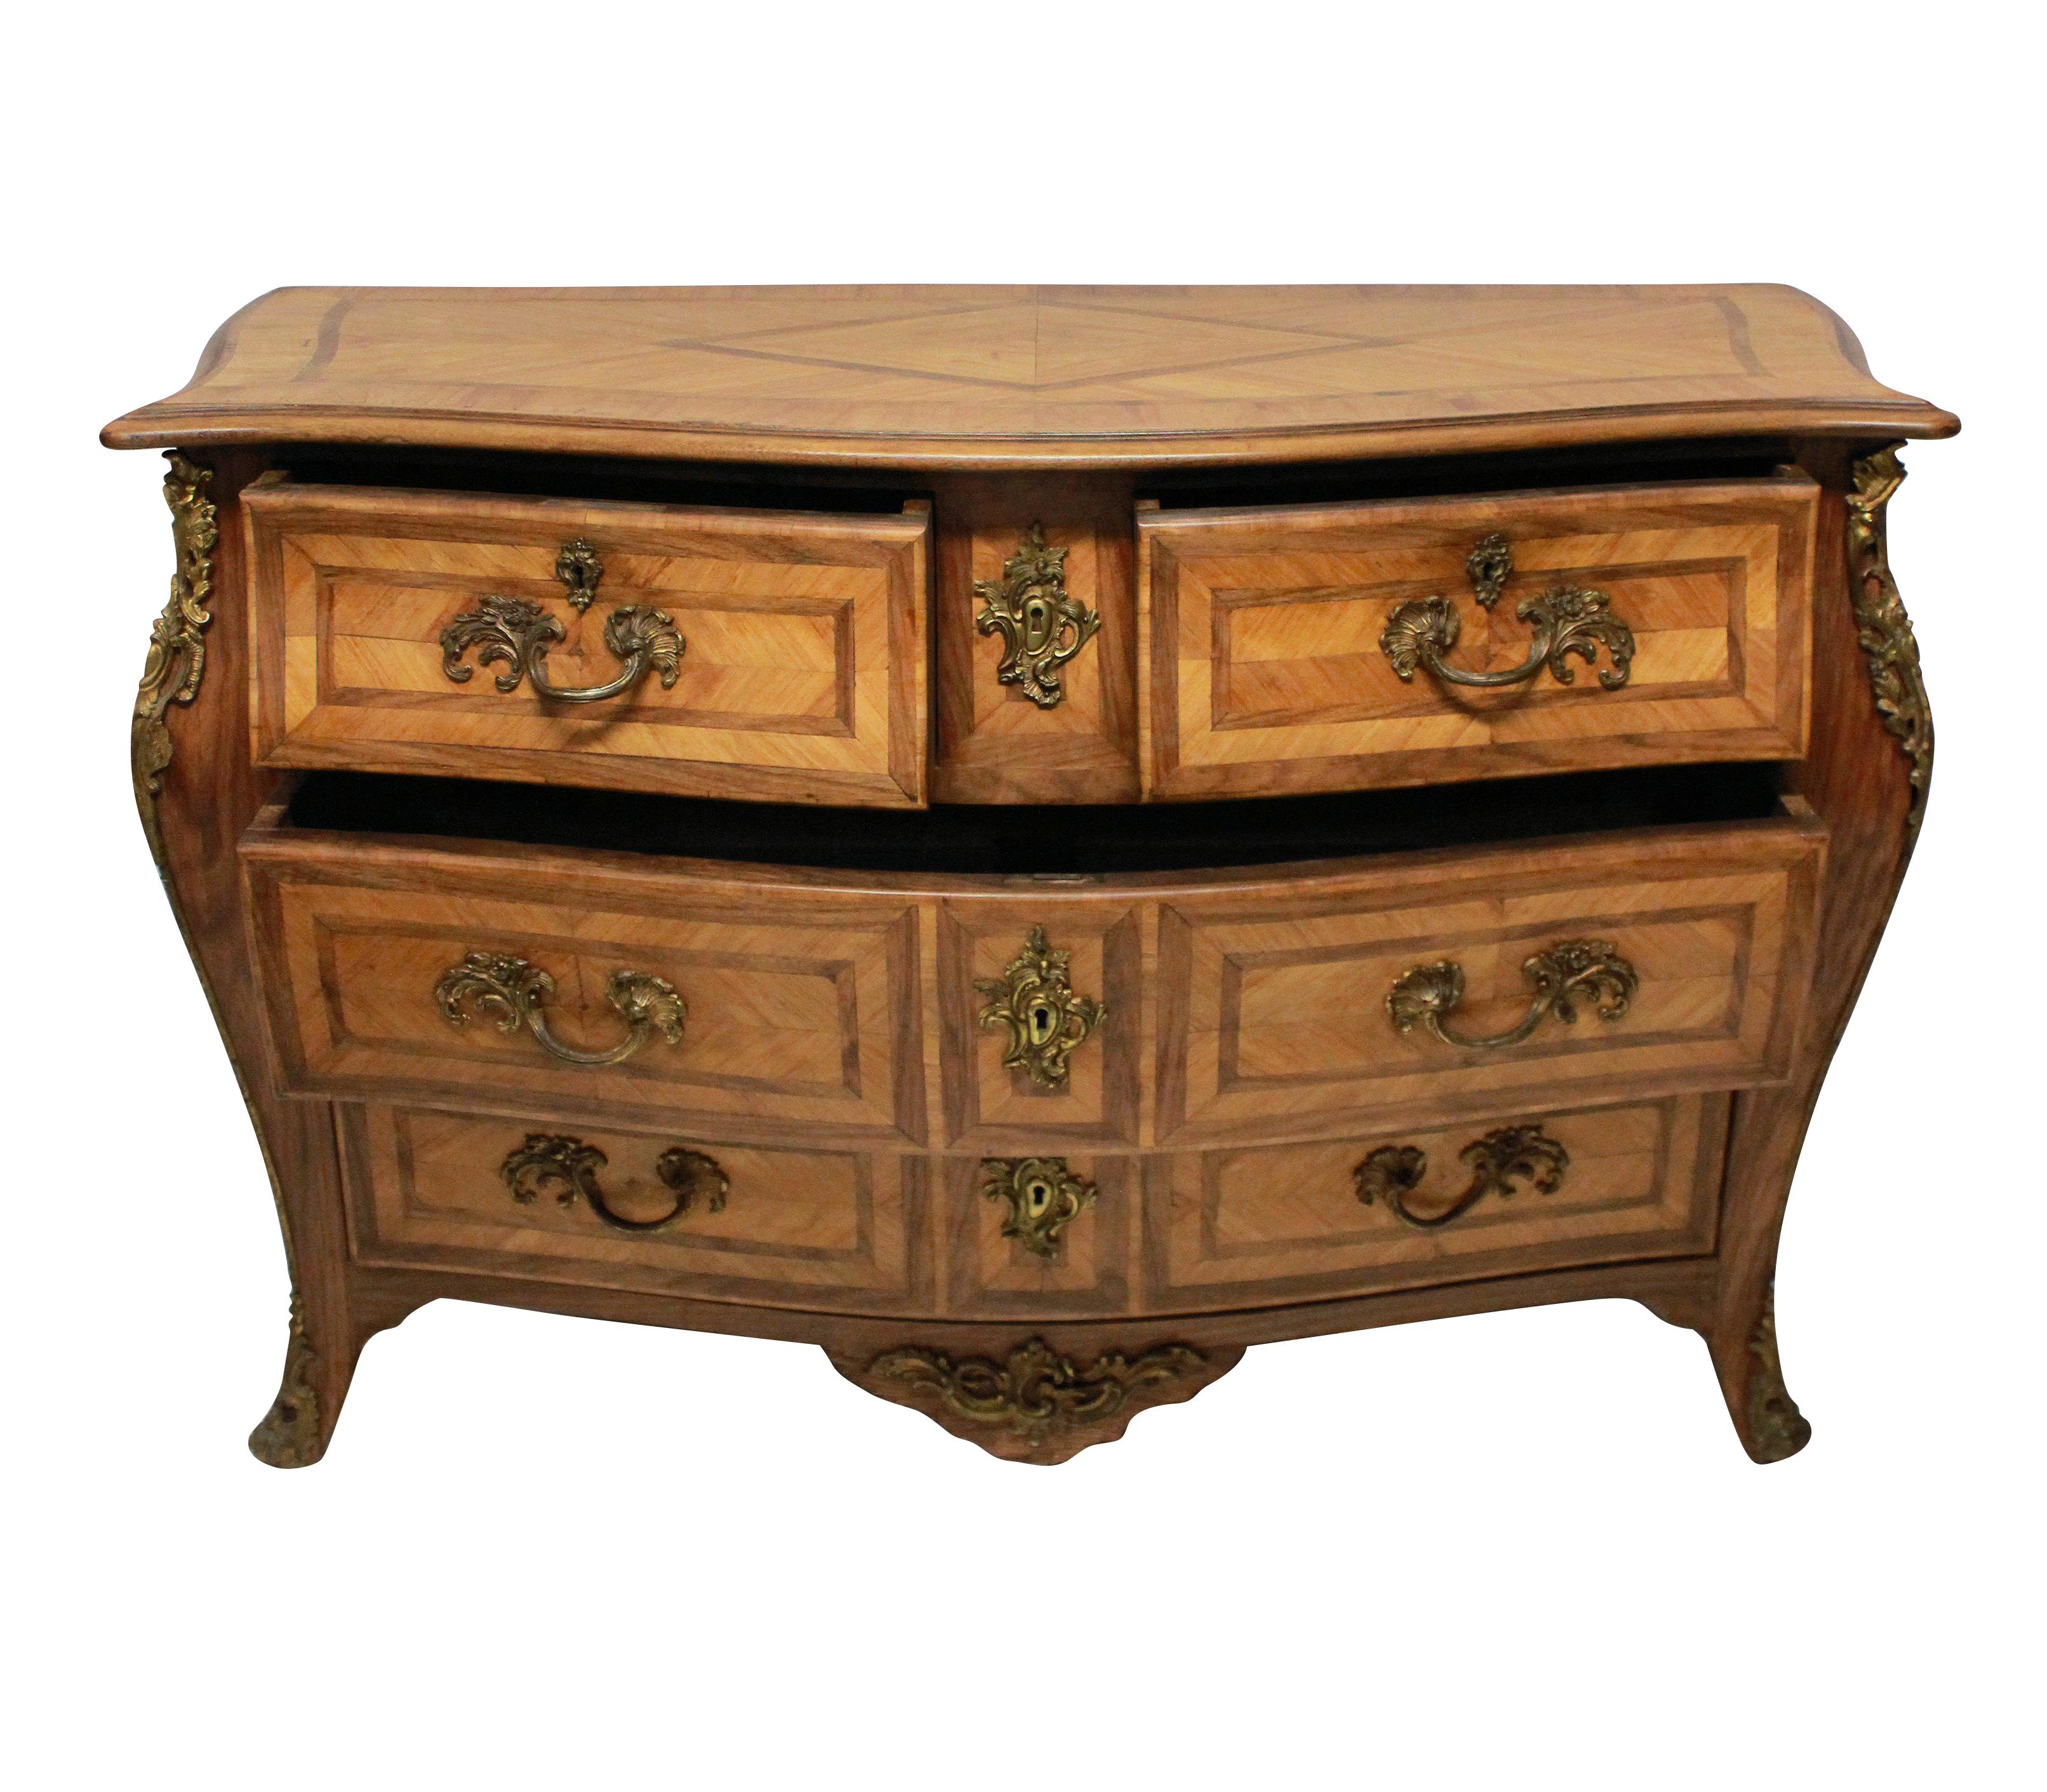 A fine French Louis XV style bombe commode in pale, bleached rosewood and kingwood. The handles and fittings in gilt bronze. The marquetry in geometric designs.

  